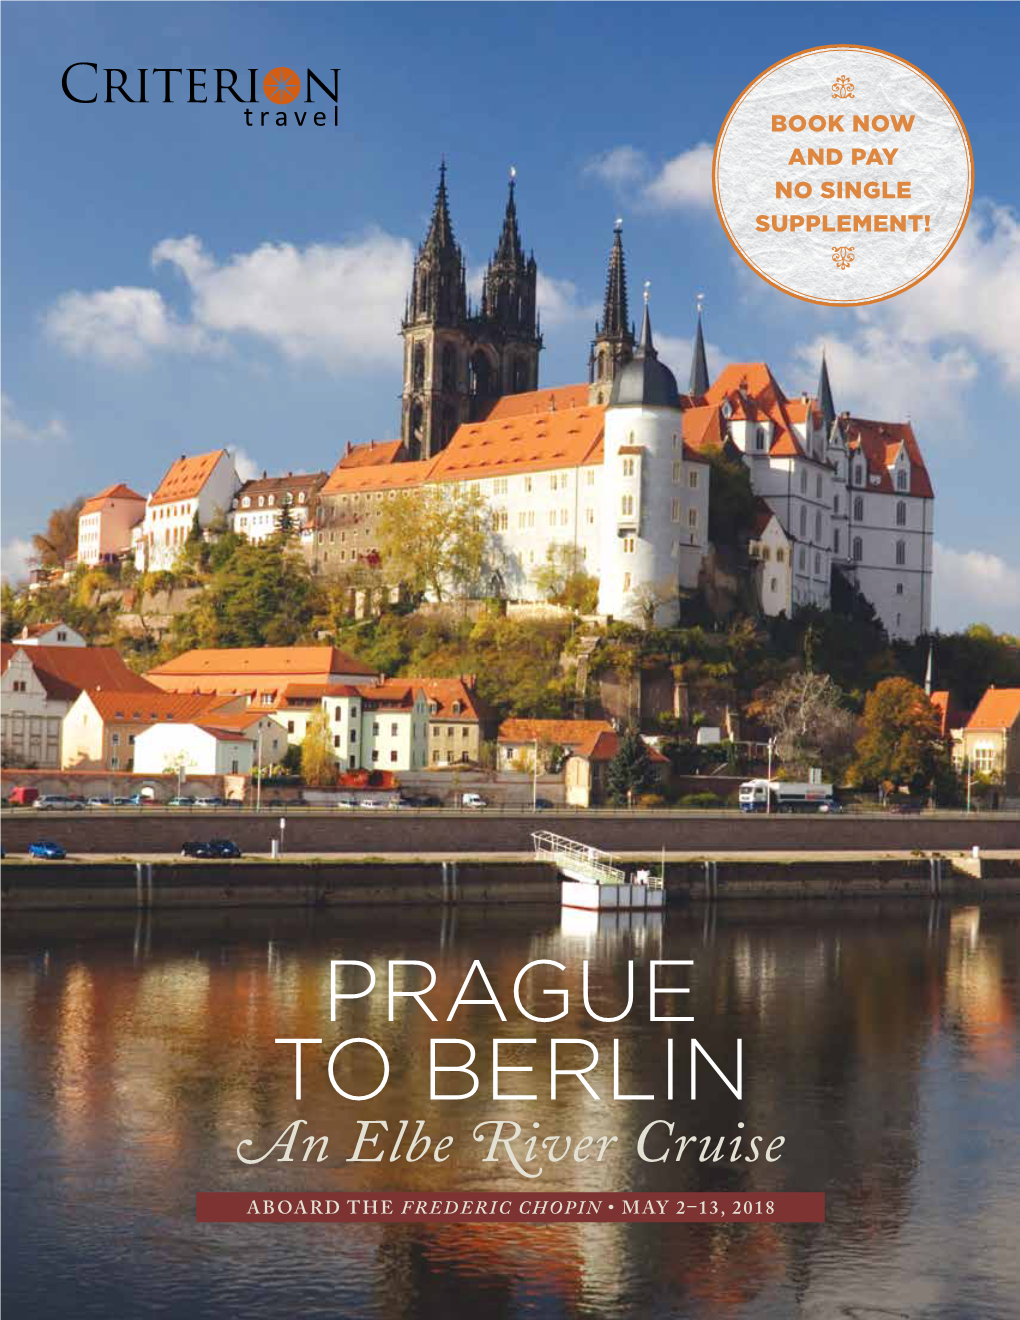 Prague to Berlin an Elbe River Cruise Aboard the Frederic Chopin • May 2–13, 2018 the Elbe River Has Long Been an Important Delineator of East and West in Europe